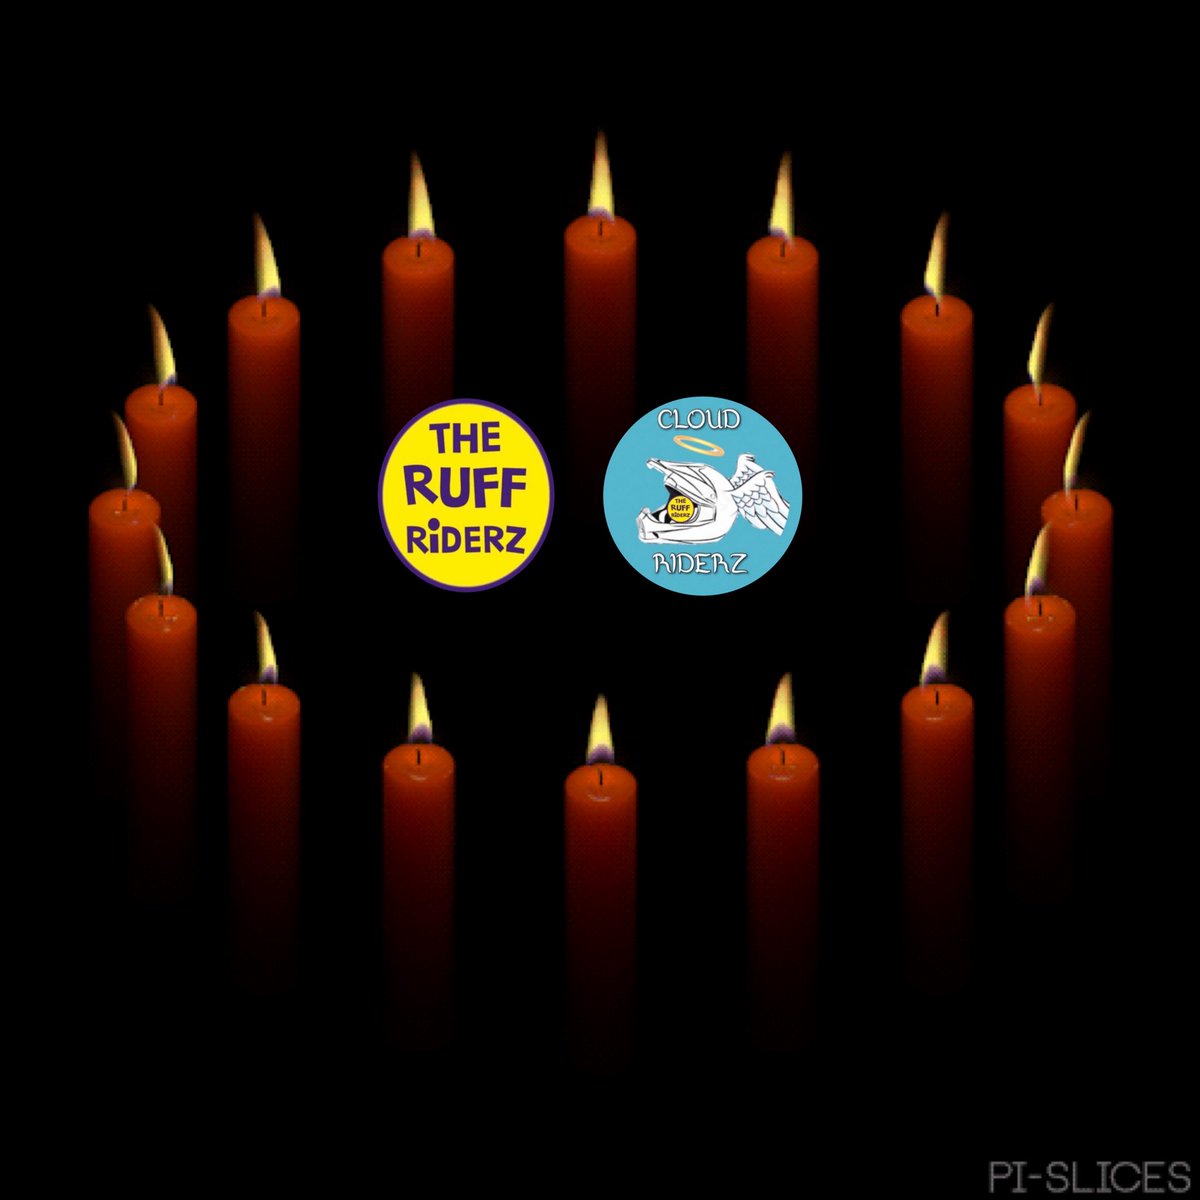 🌈🏍️💔We will burn our #theruffriderz groupcandle today for our Biker and sweet friend Cupcake @QueenVLM who crossed 🌈Bridge. Ride the heavenly roads now sweet Cupcake. May this candle enlighten your path and bring comfort to your family and friends. Until we meet again 🌈✨